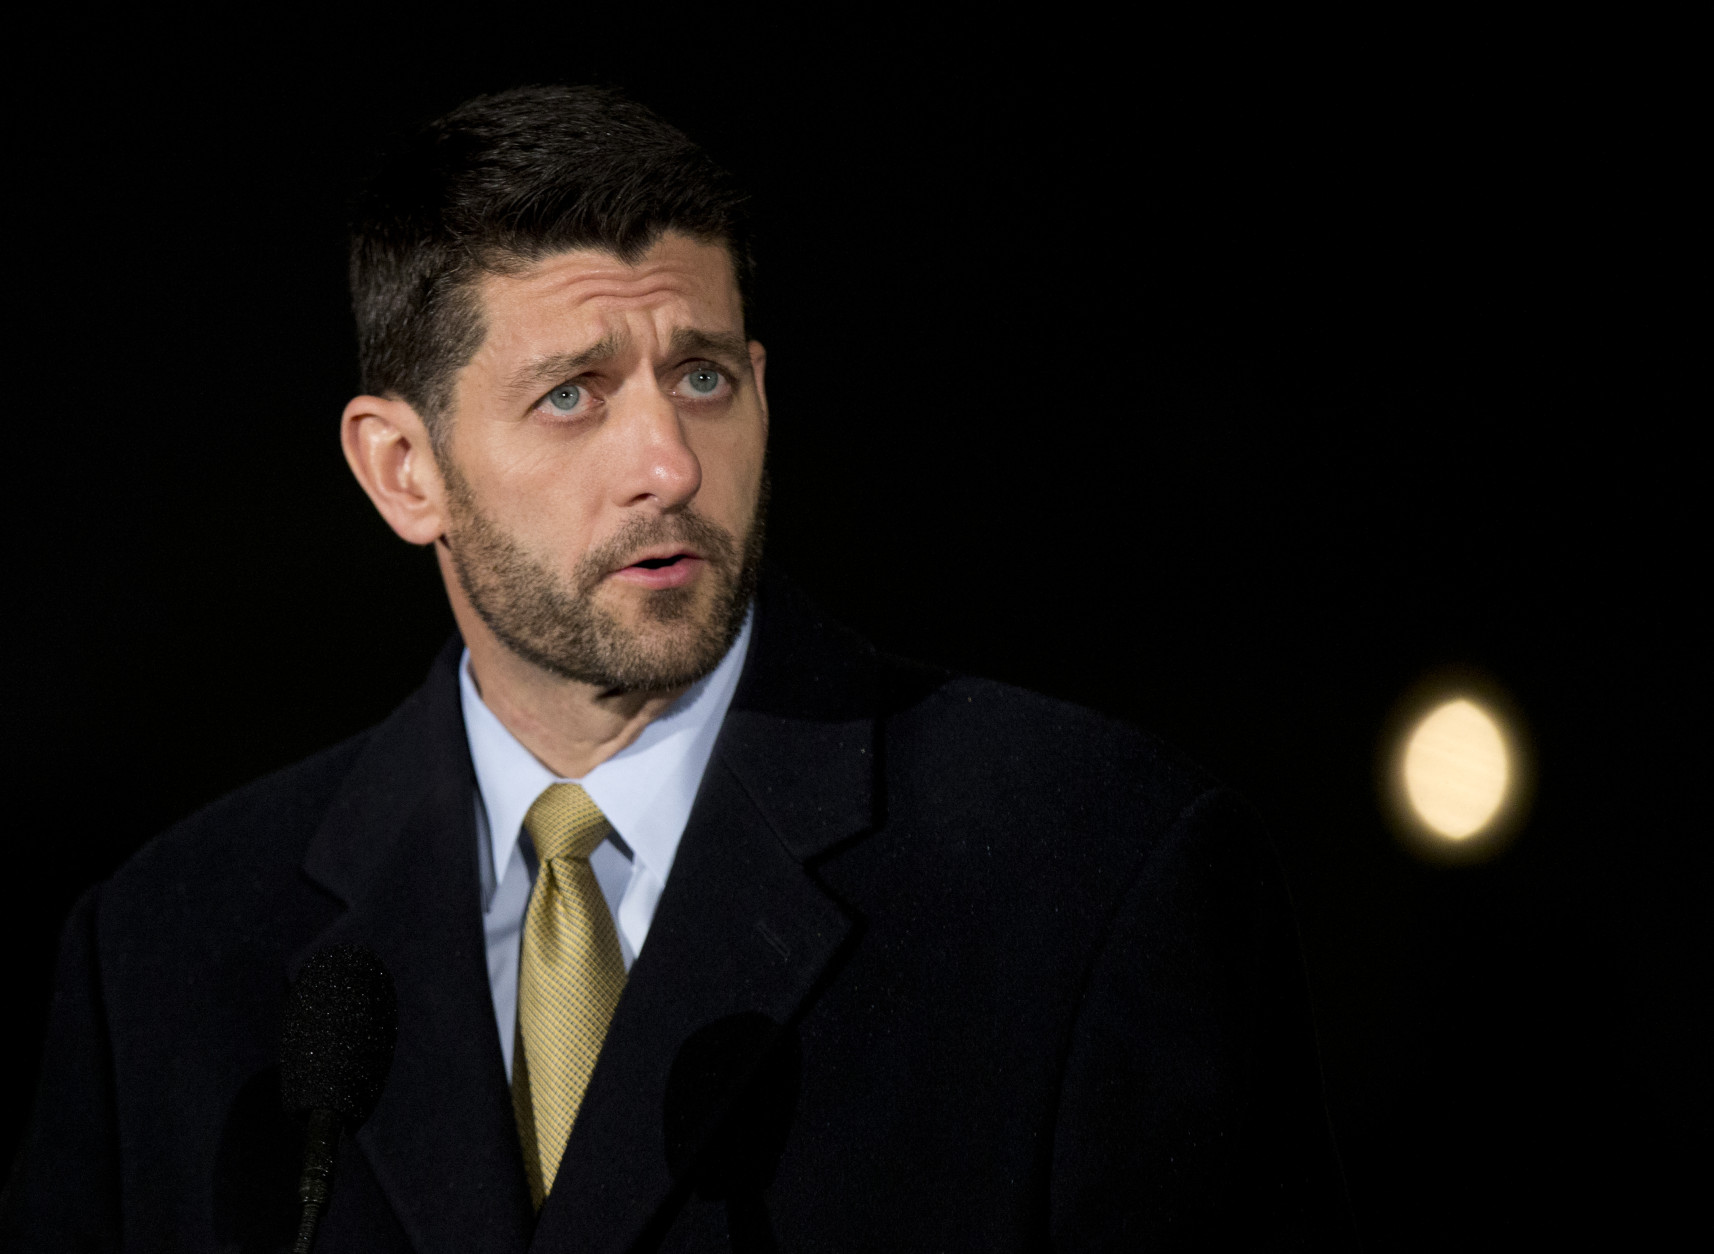 House Speaker Paul Ryan, R-Wis., speaks during the lighting of the U.S. Capitol Christmas tree, on the West Front of the Capitol in Washington, Wednesday, Dec. 2, 2015. The 2015 U.S. Capitol Christmas Tree is a 74 feet Lutz tree from Chugach National Forest in Alaska. (AP Photo/Manuel Balce Ceneta)